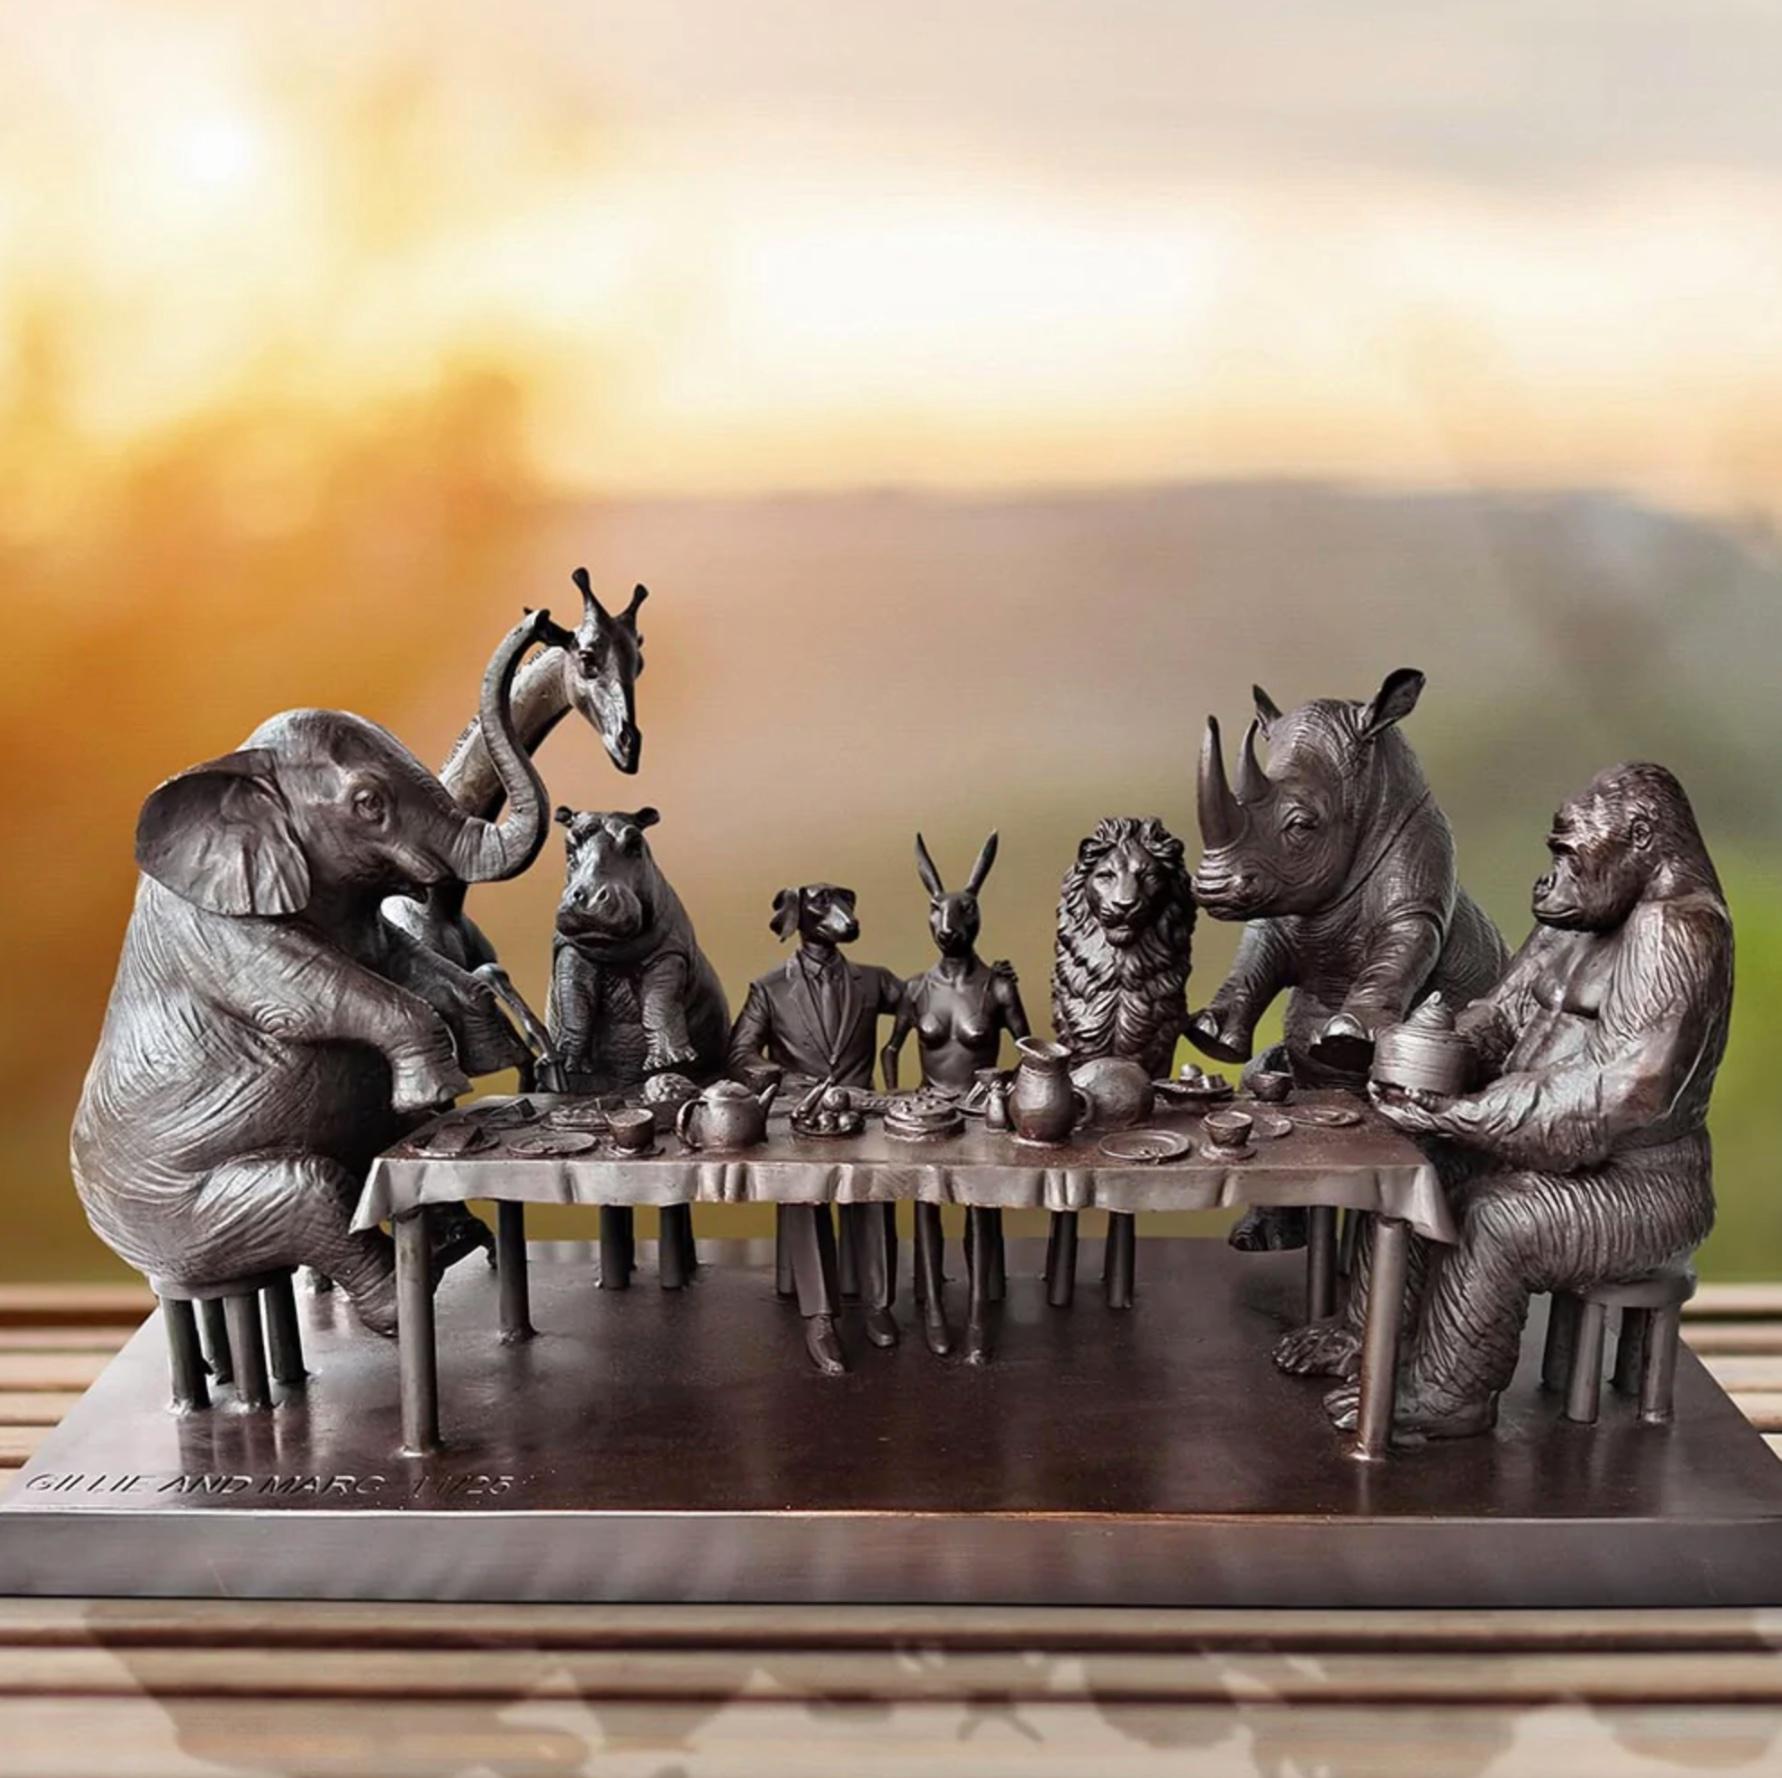 Title: Wild Tea Party
Authentic Bronze Sculpture

This authentic bronze sculpture titled 'Wild Tea Party' by artists Gillie and Marc has been meticulously crafted in bronze. It features a Gillie and Marcs famous Dogman and Rabbitwoman sitting at the